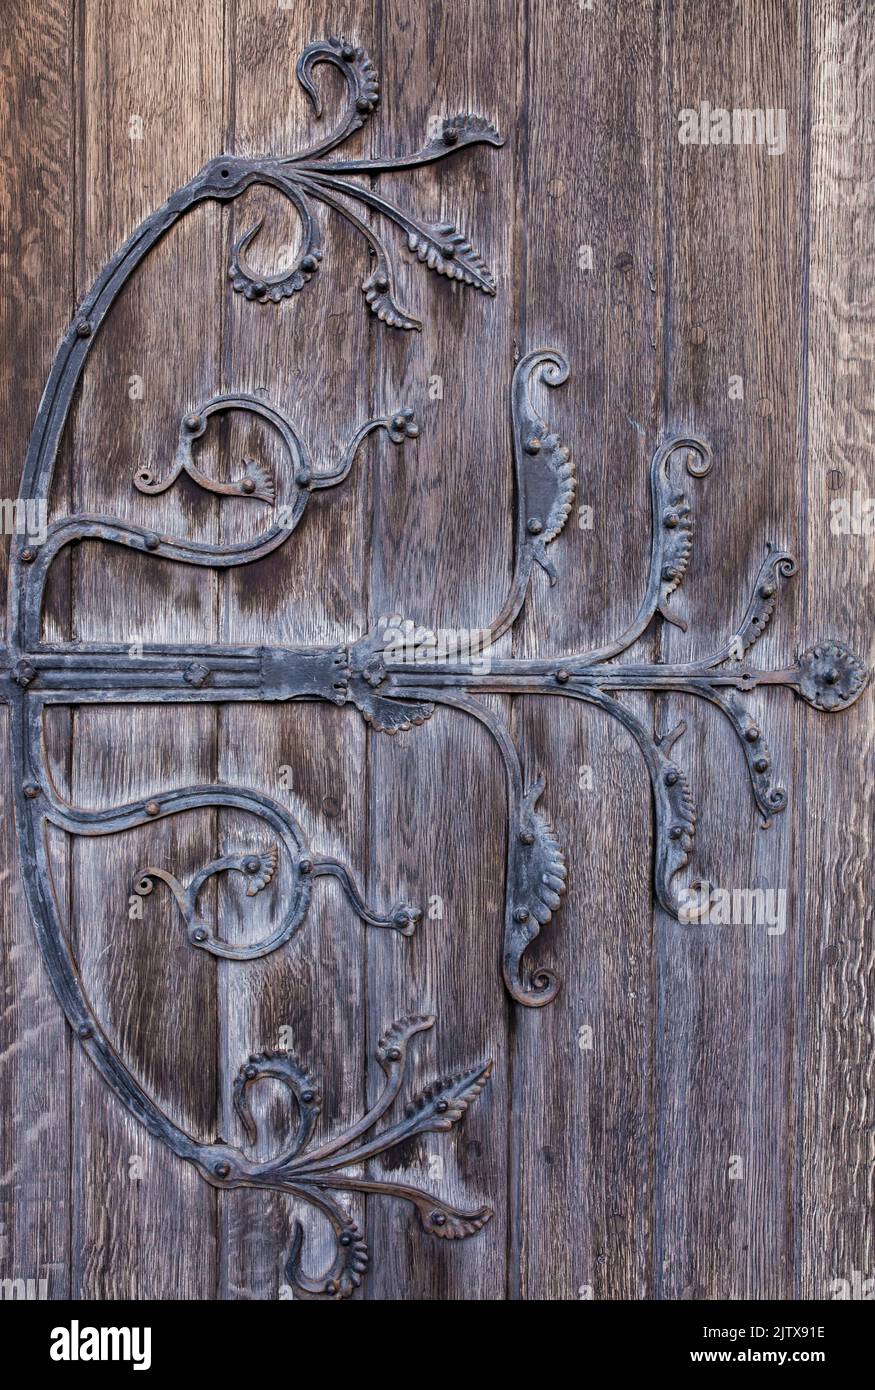 Christ Church Cathedral ground door, Dublin, Ireland. Decorated hinges detail. Stock Photo